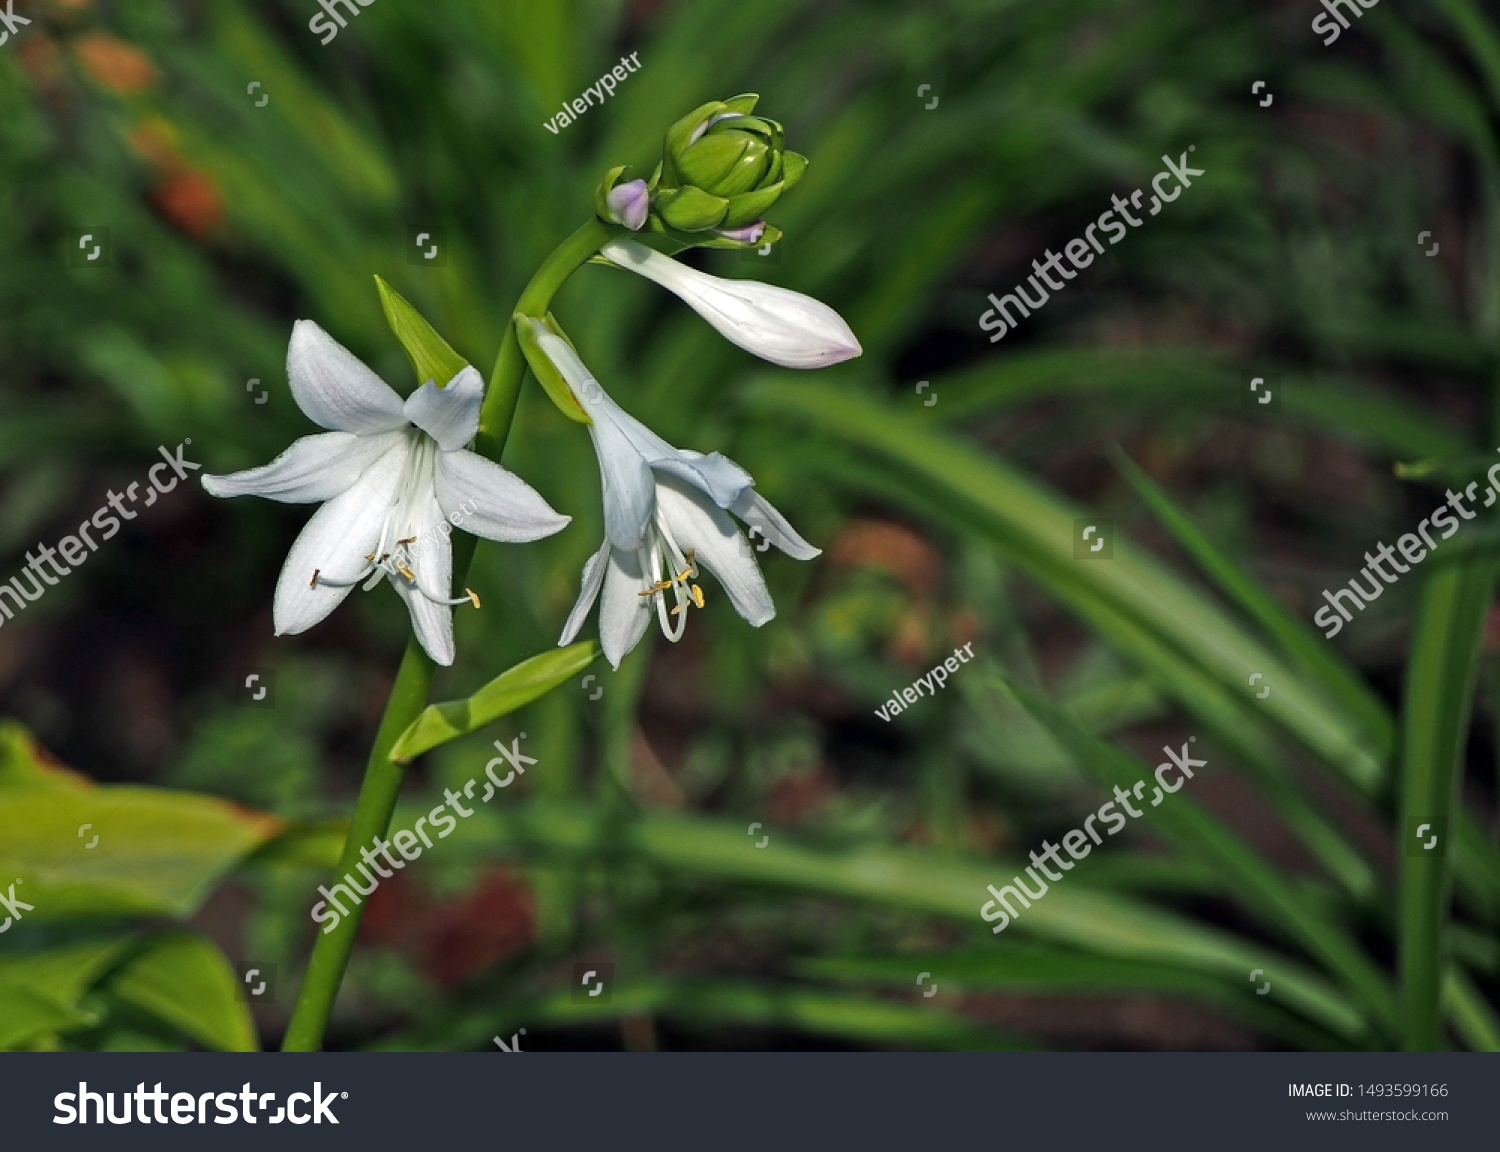 Flowers Like Small White Lilies Stock Photo Edit Now 1493599166